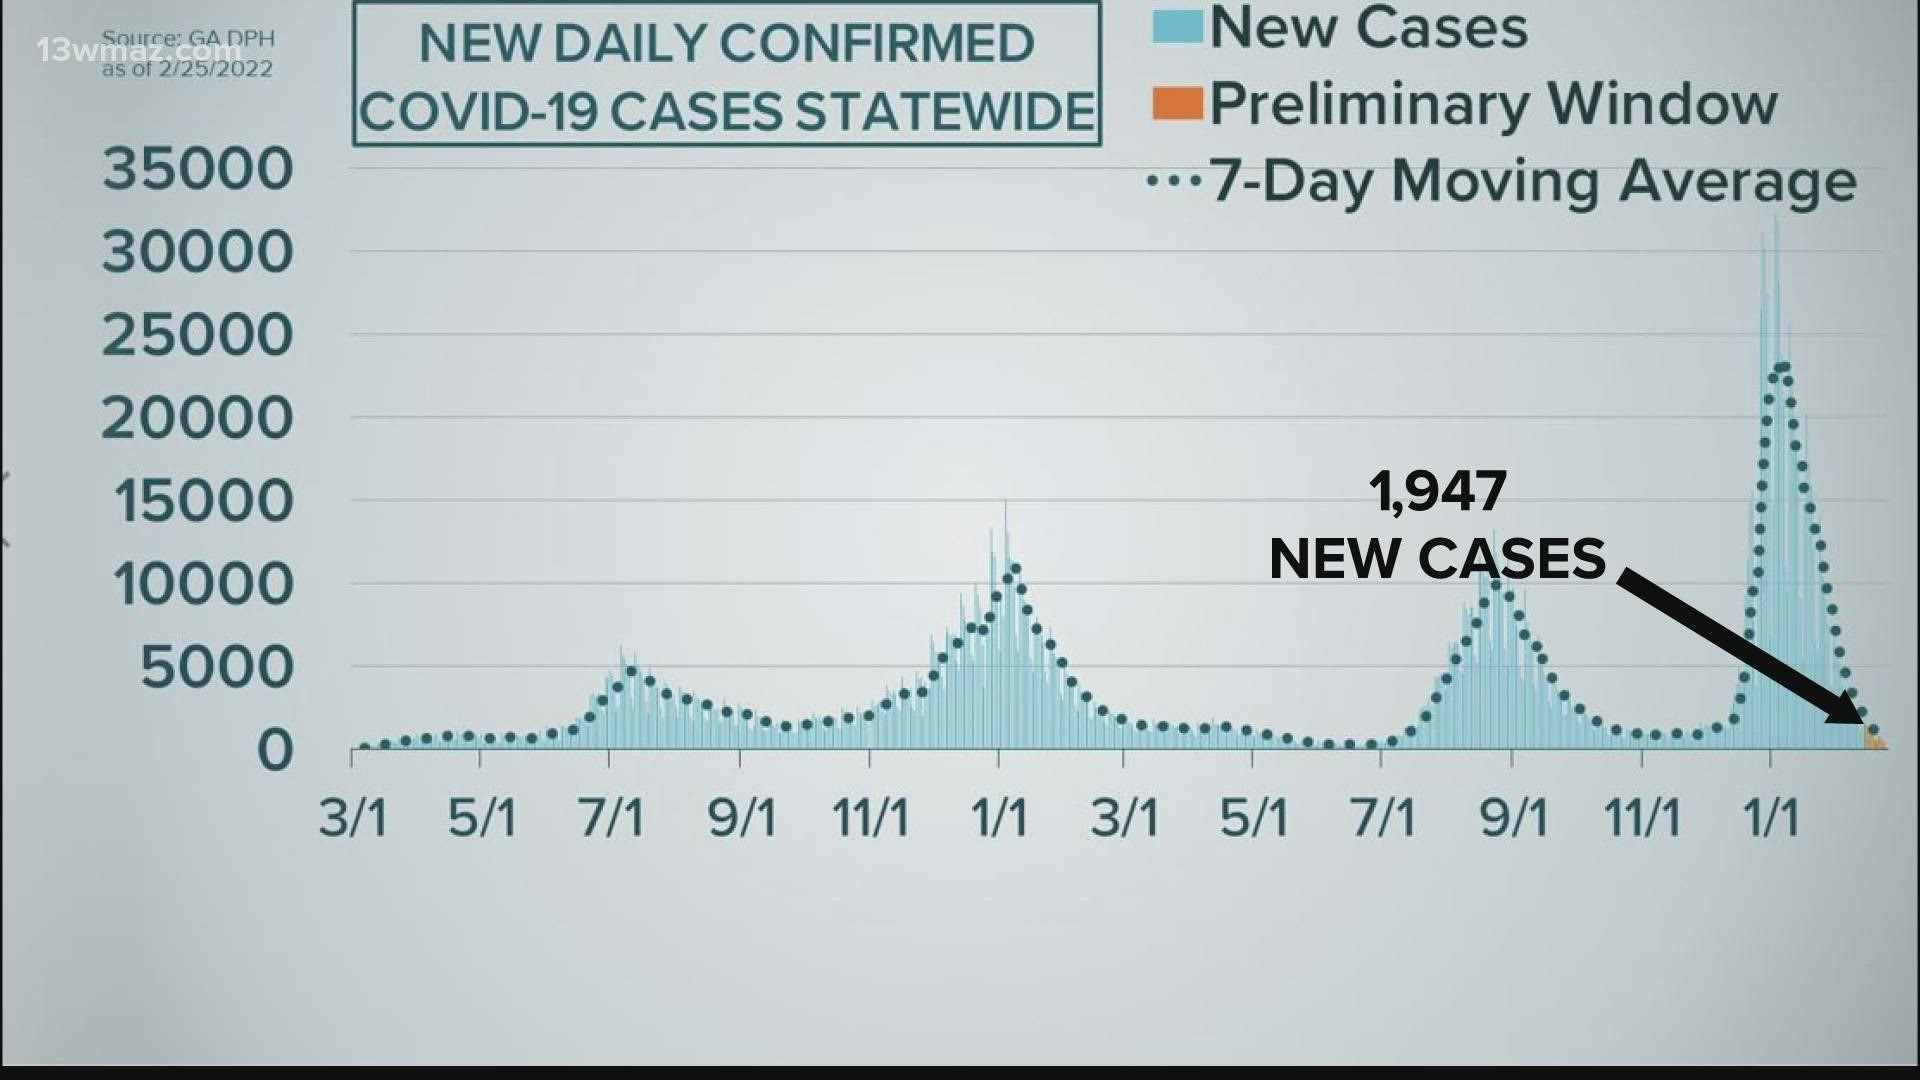 Georgia continues to see rapidly declining COVID-19 case numbers.